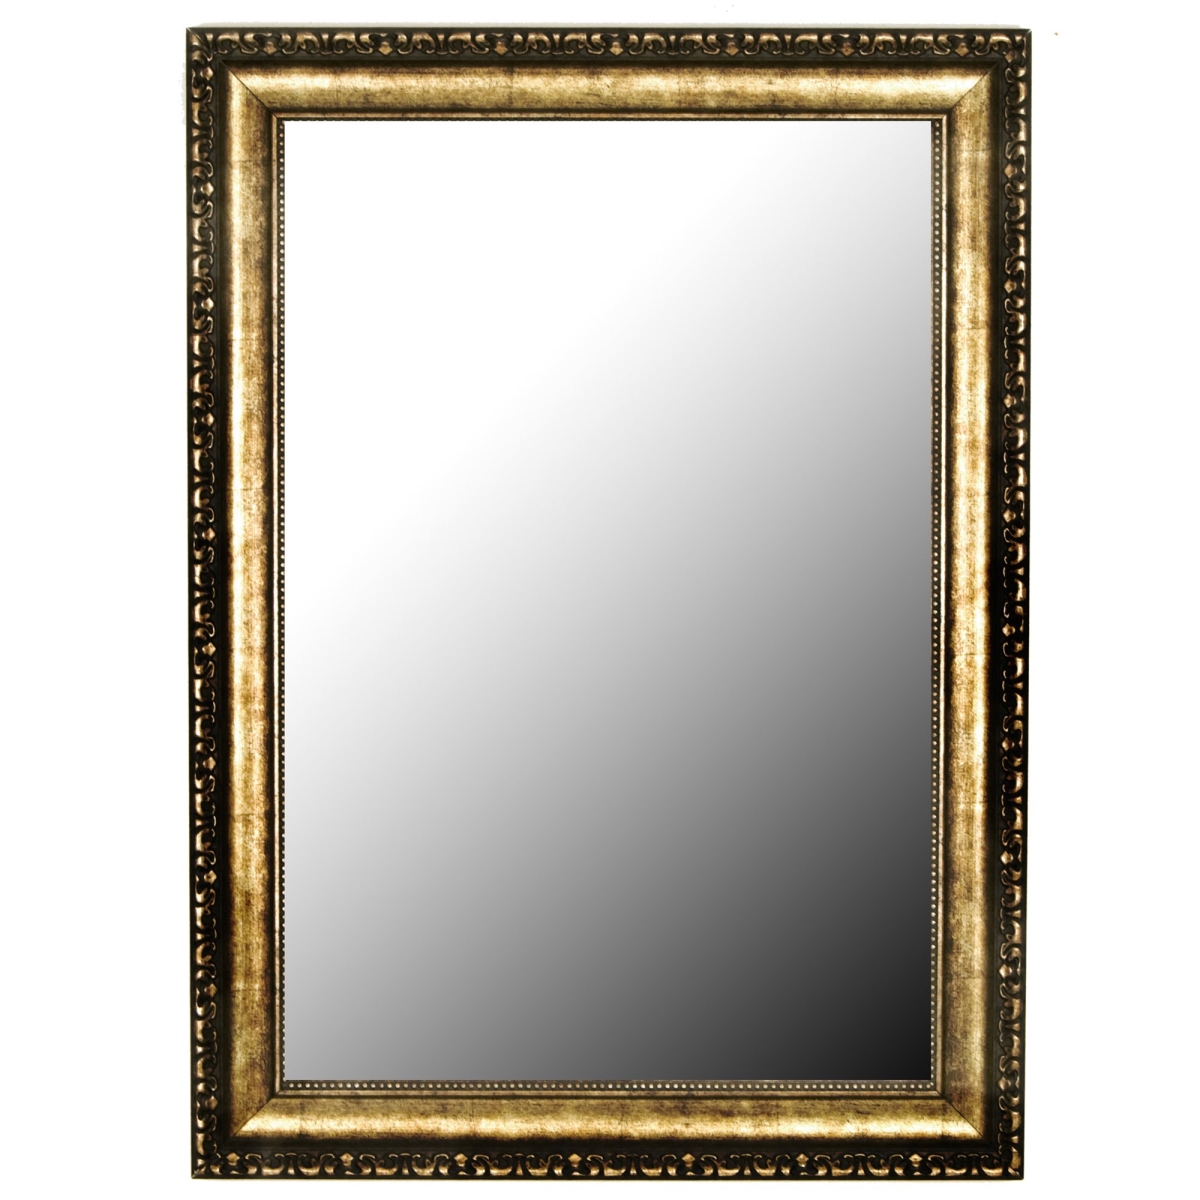 Hitchcock Butterfield 810700 Gold Lavonne Wall Mirror - 27.25 X 37.25 In.